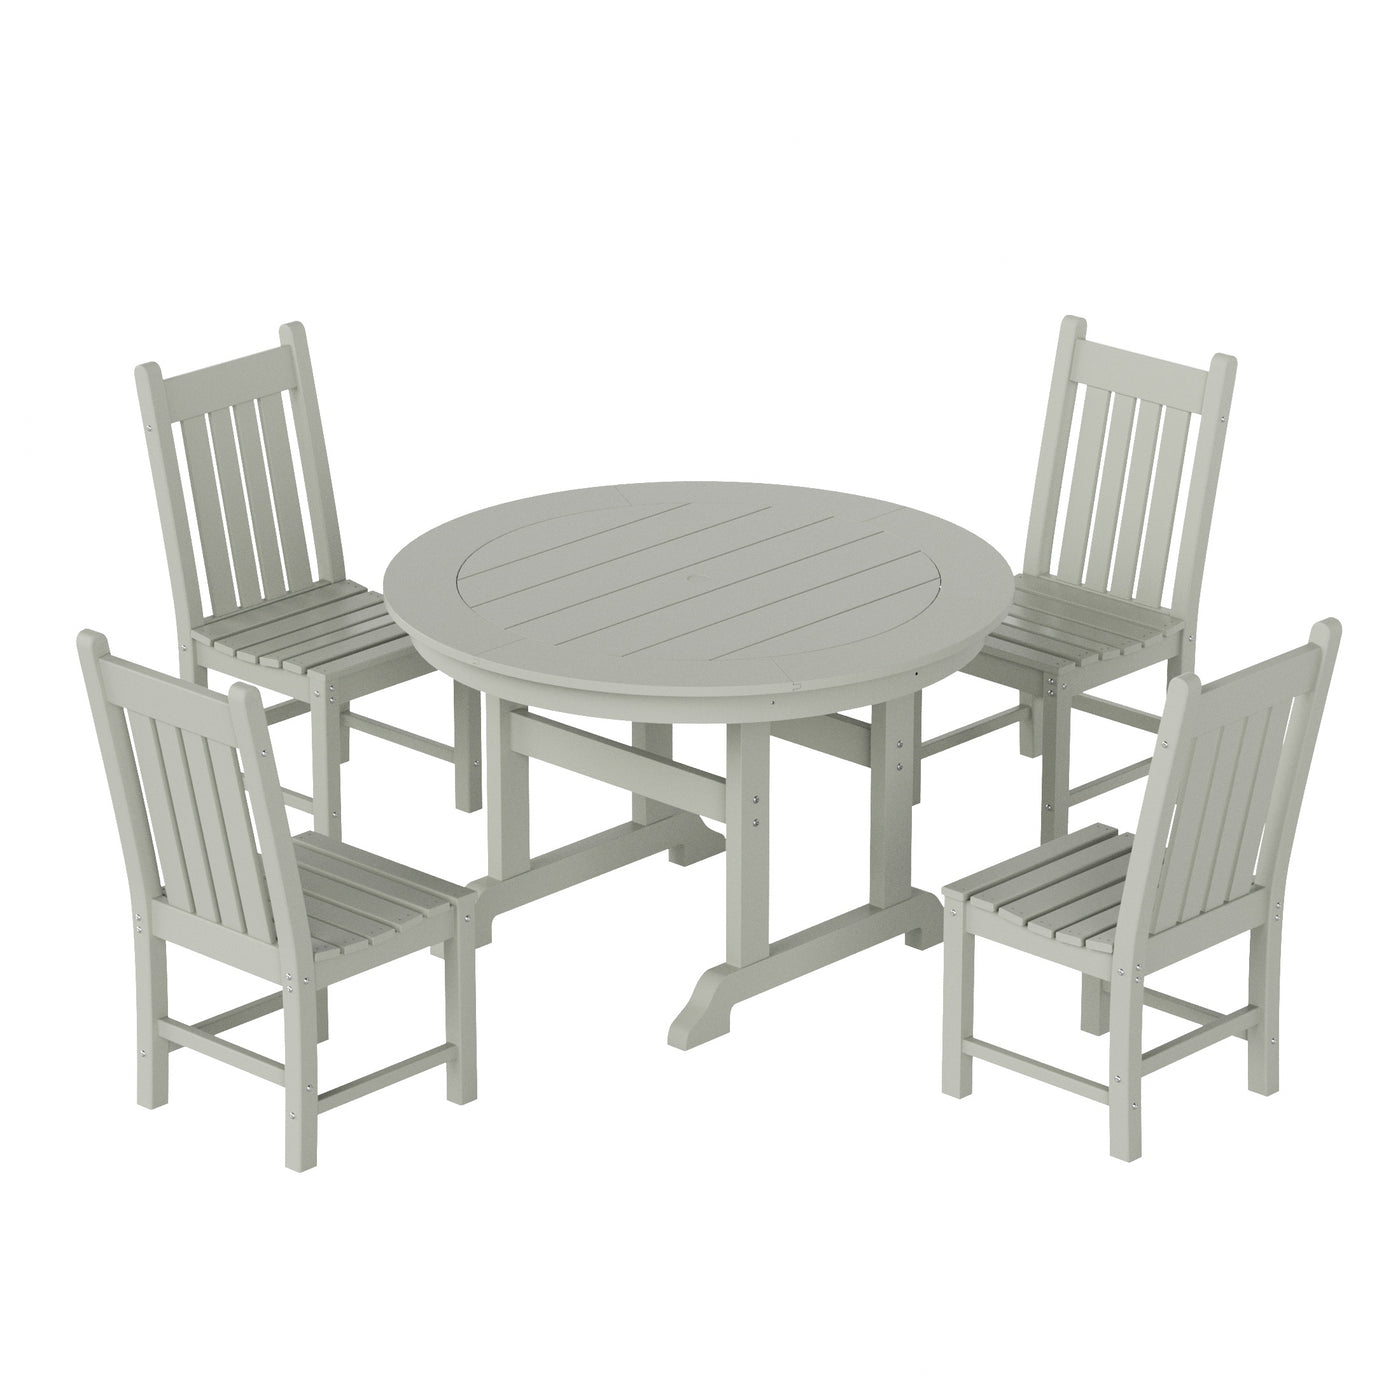 Malibu 5 Piece Outdoor Patio Dining Set Outdoor Round Table and Side Chair